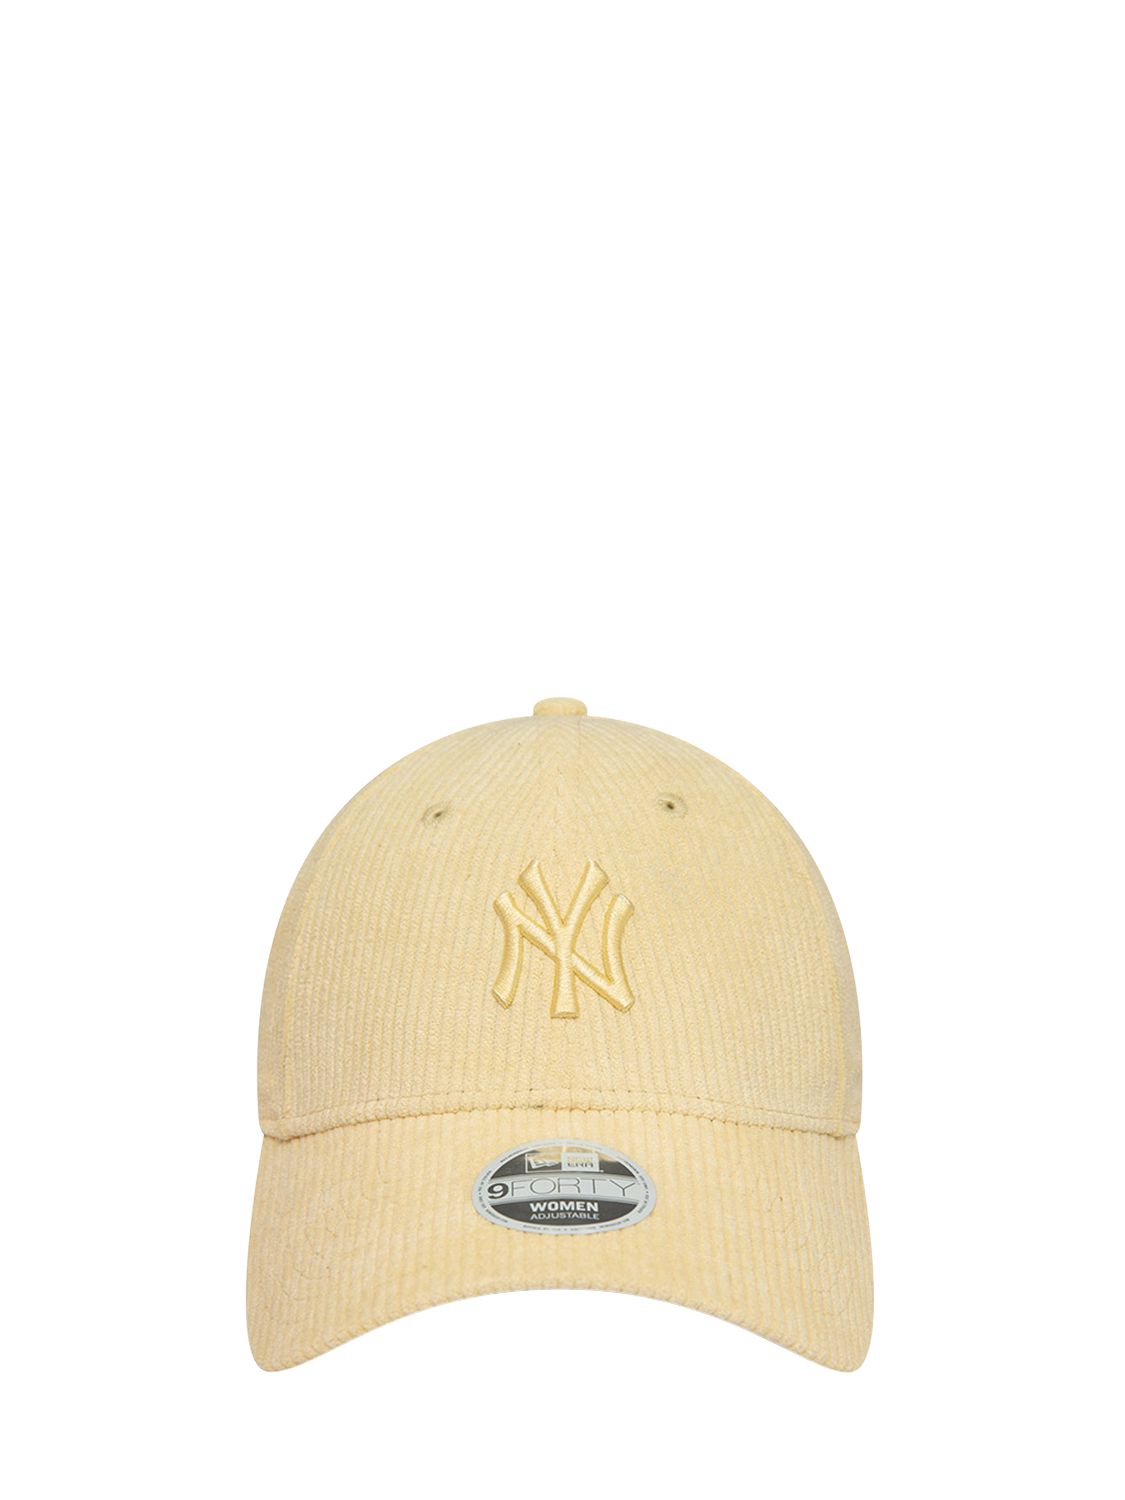 Image of Ny Yankees Female Summer Cord 9forty Hat